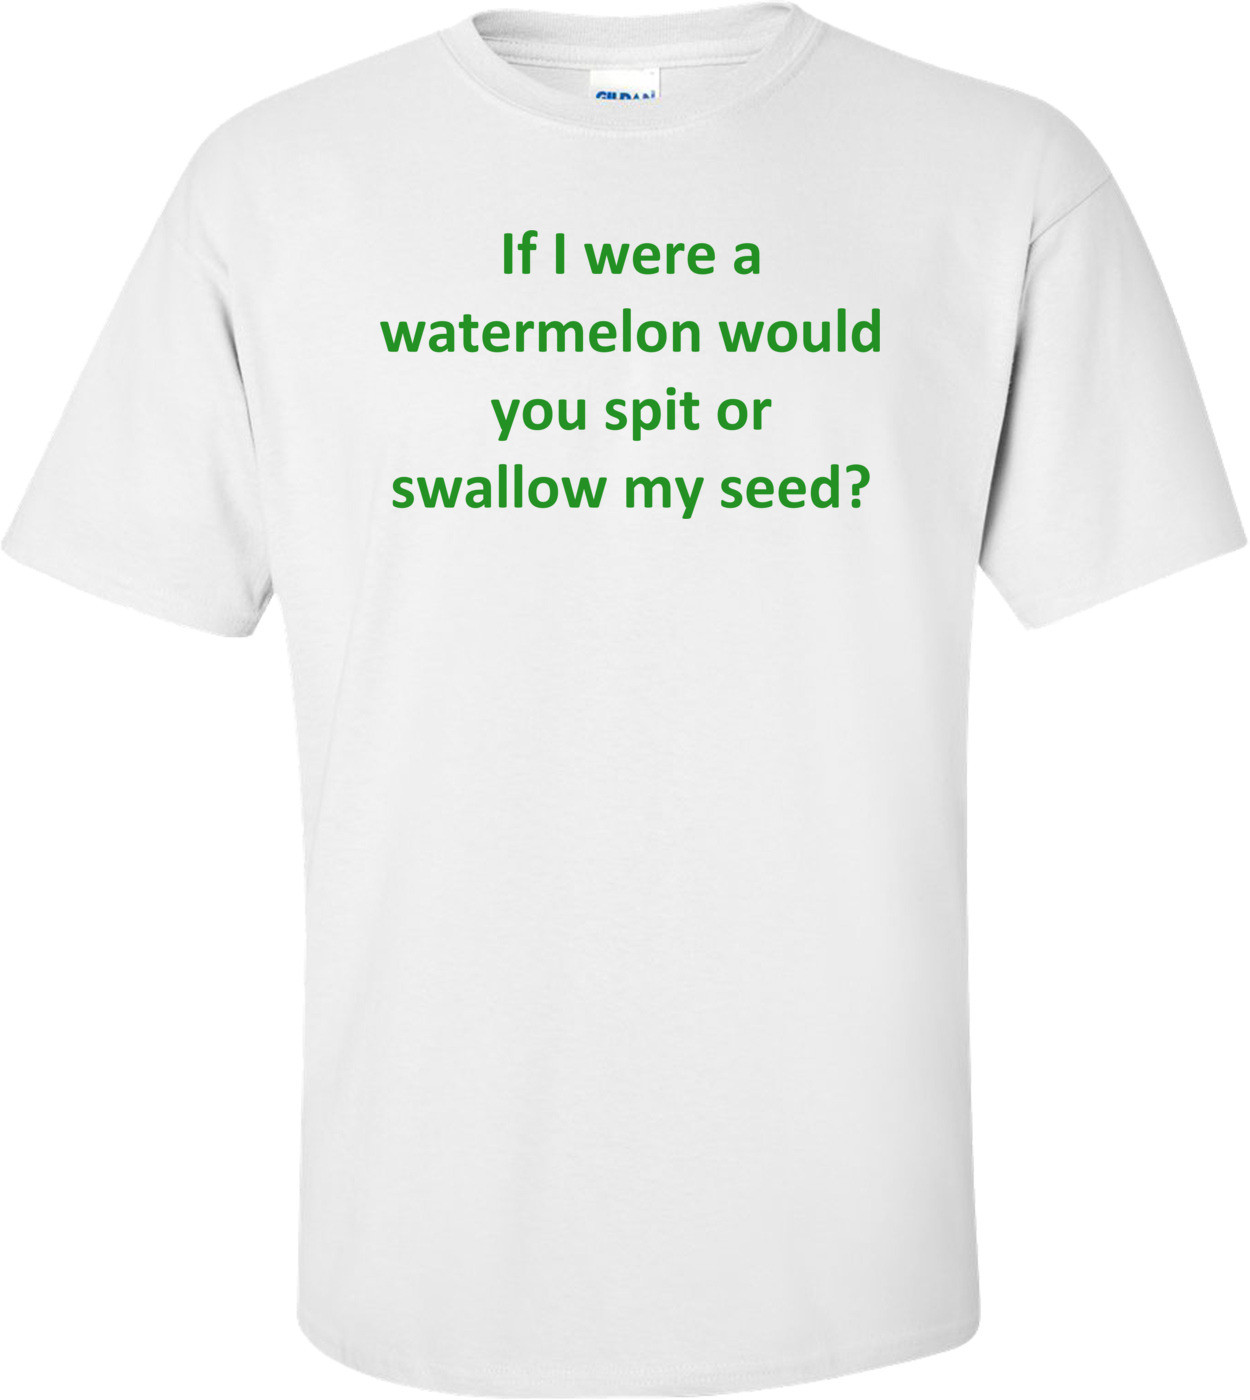 If I were a watermelon would you spit or swallow my seed? Shirt